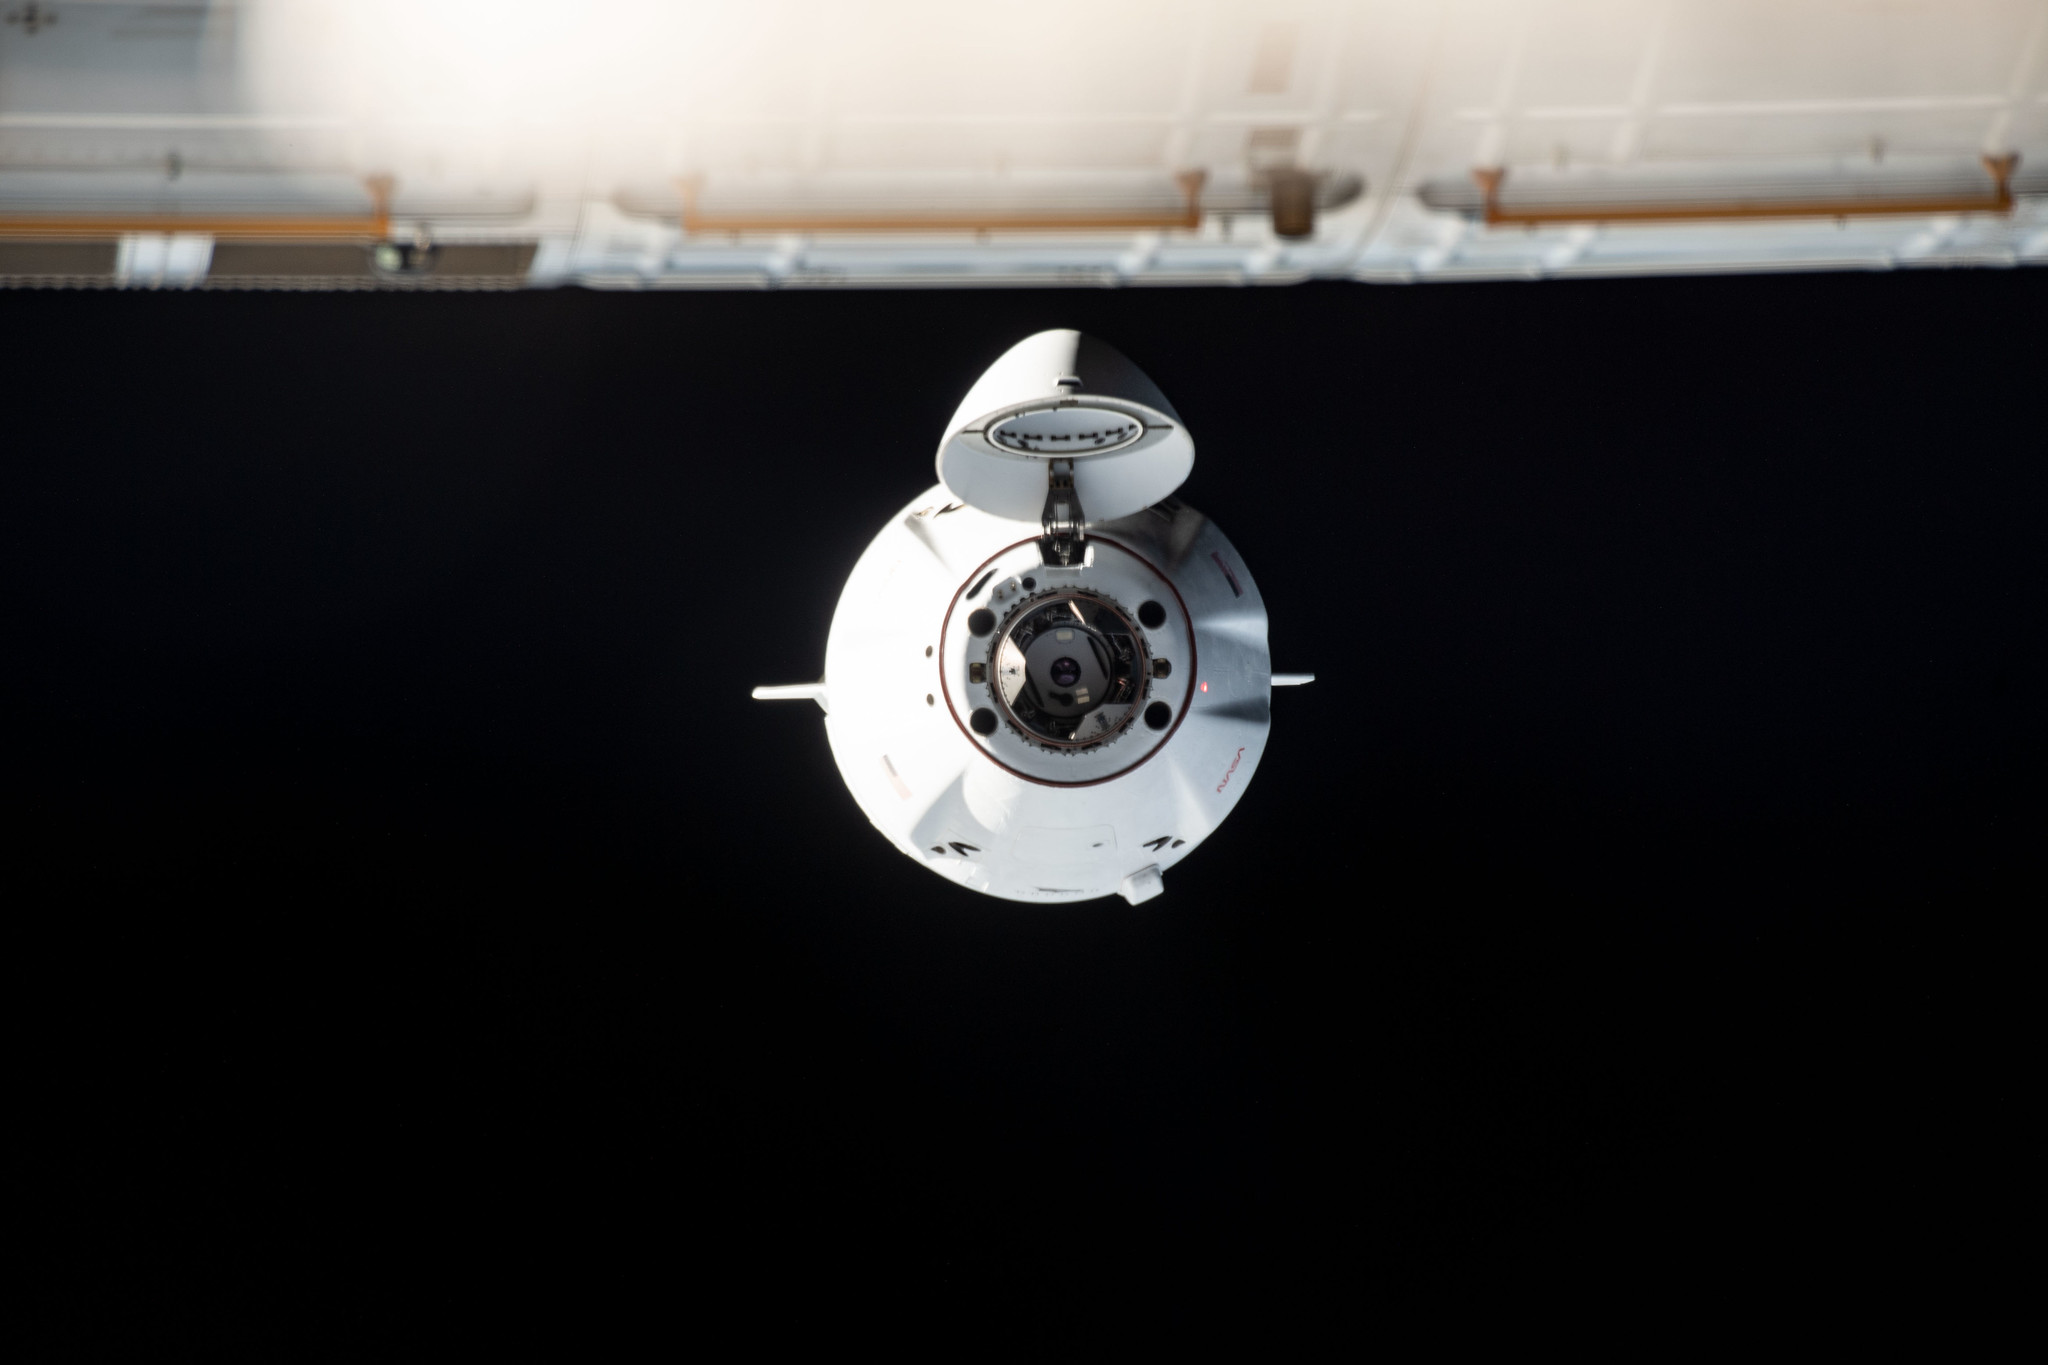 The SpaceX Dragon cargo resupply spacecraft, on its 25th Commercial Resupply Services mission, approaches the International Space Station on July 16 to deliver over 5,800 pounds of new science experiments and crew supplies.